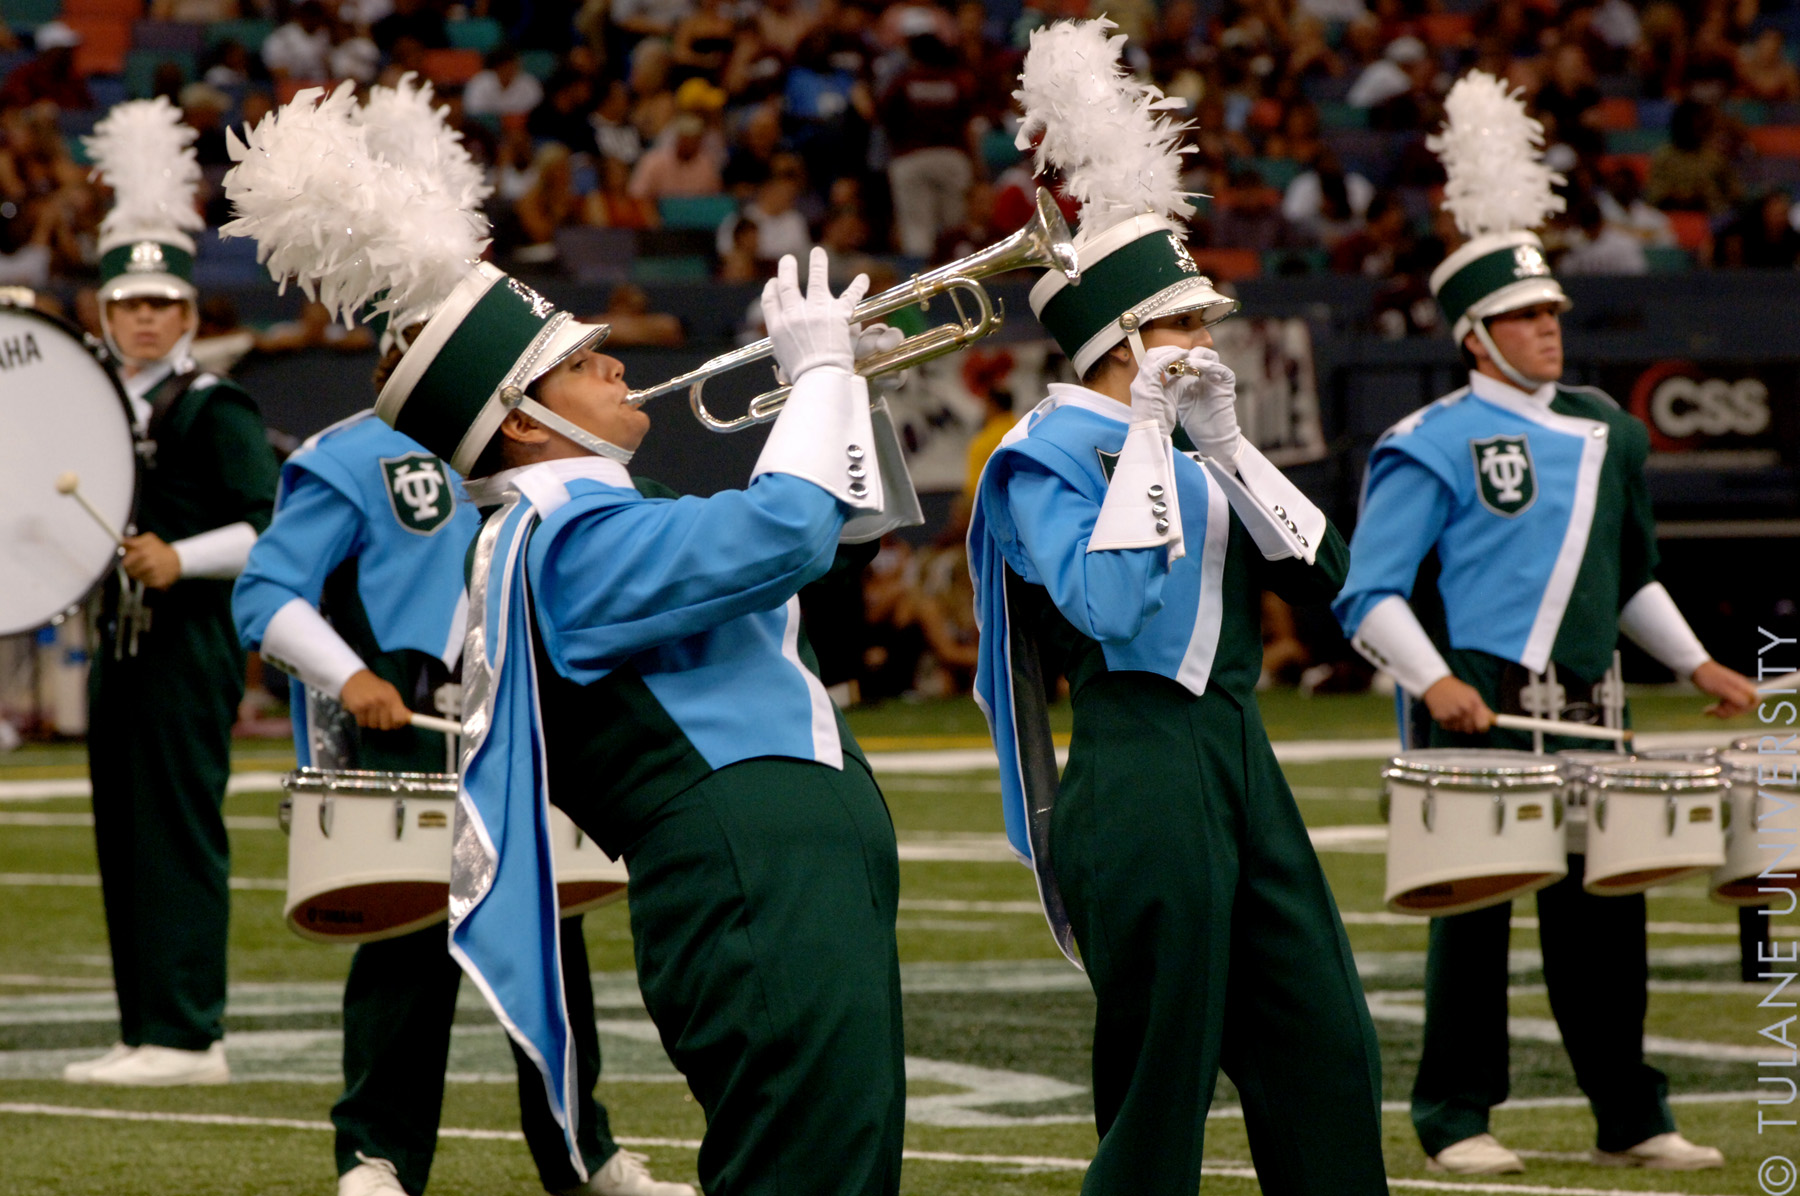 Commons:A. Marching Band (3618167184).jpg. 